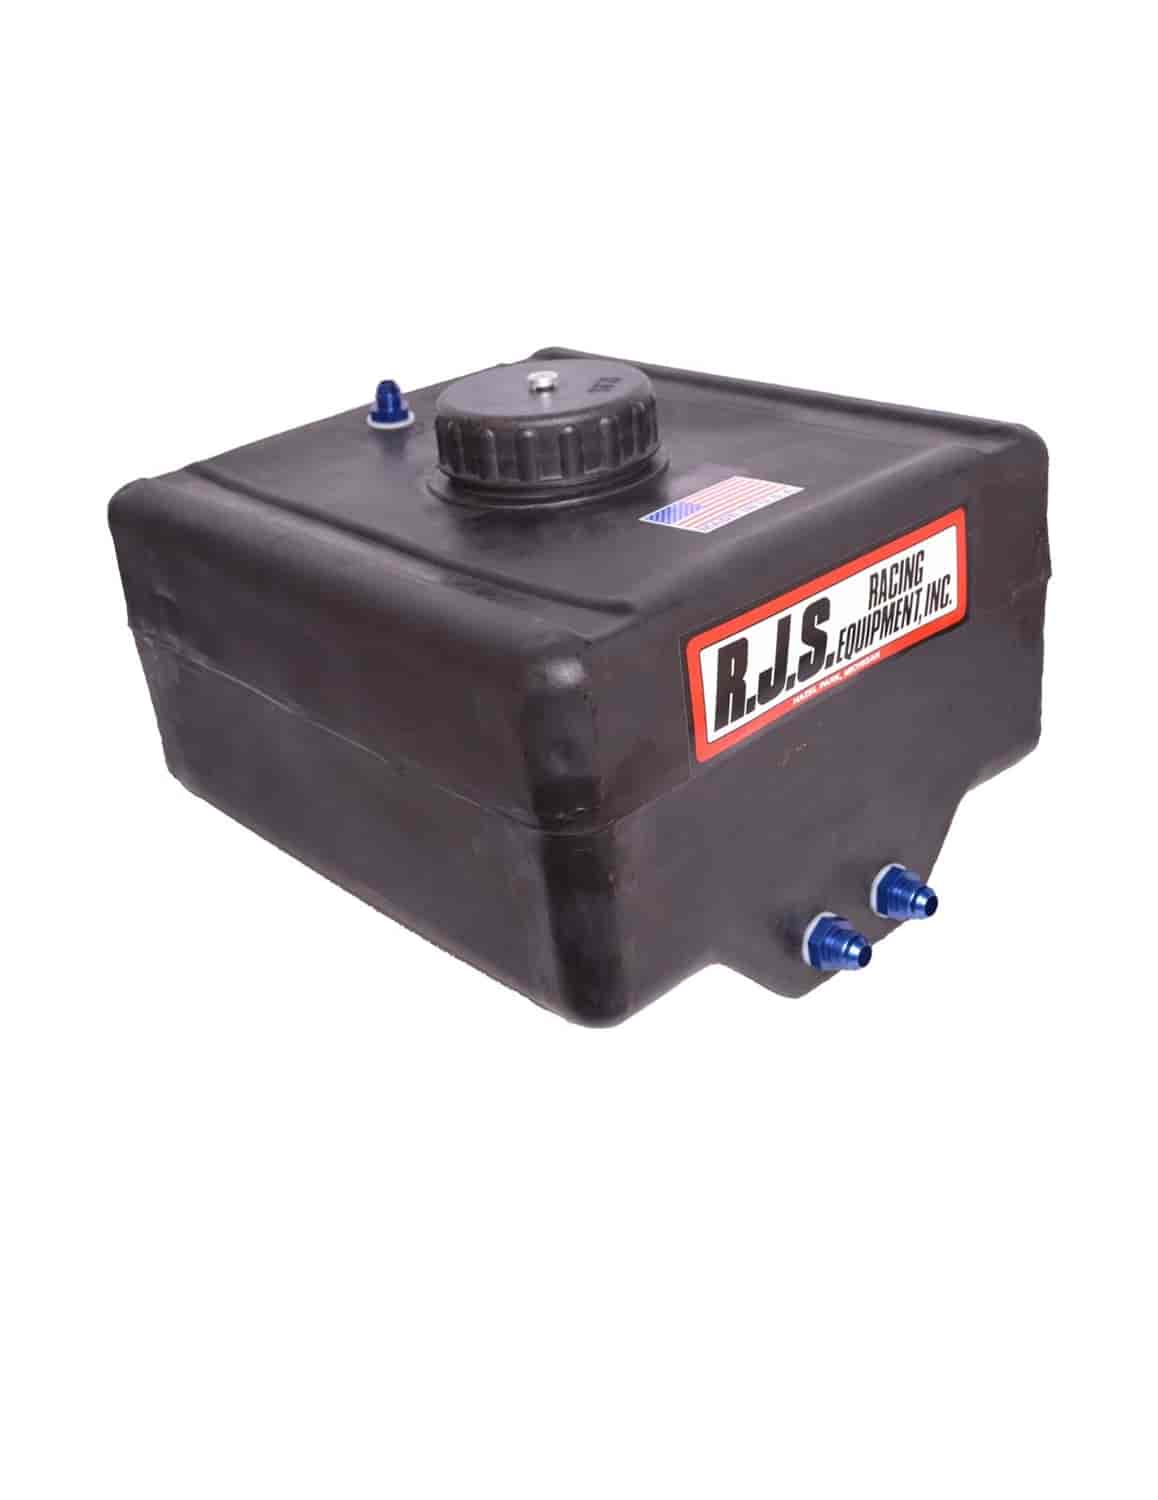 12 Gallon Drag Fuel Cell with Aircraft Style Cap